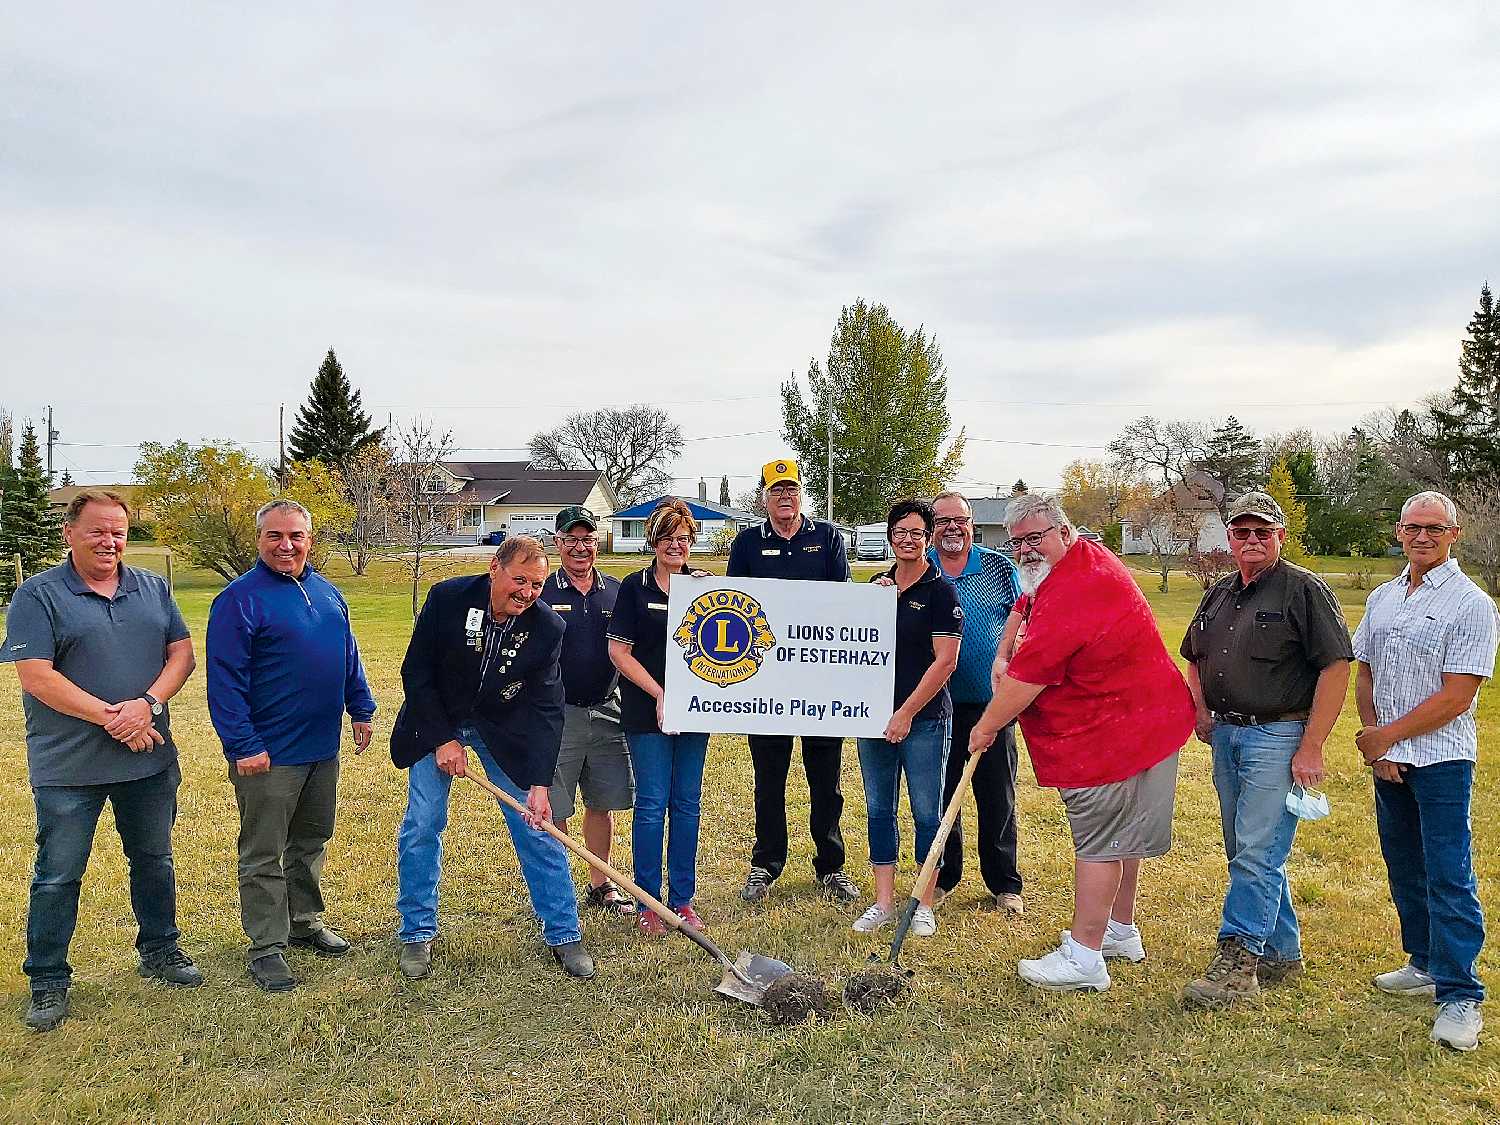 On Wednesday, the sod turning was held for the new accessible play park being installed at the Esterhazy Historical Park. The play park is being funded by the Estehrazy Lions Club and by the town. From left are Town Councilor Vern Petracek, Town Administrator Mike Thorley, Lion Dan Babyak, Lion Harold Esslinger, Lion Audrey Petracek, Lion Jon Simpson, Lion Brenda Redman, Rec Director Garth Forster, Mayor Grant Forster, Town Councilor Earl Nickell and Town Councilor Marty Pfeifer.